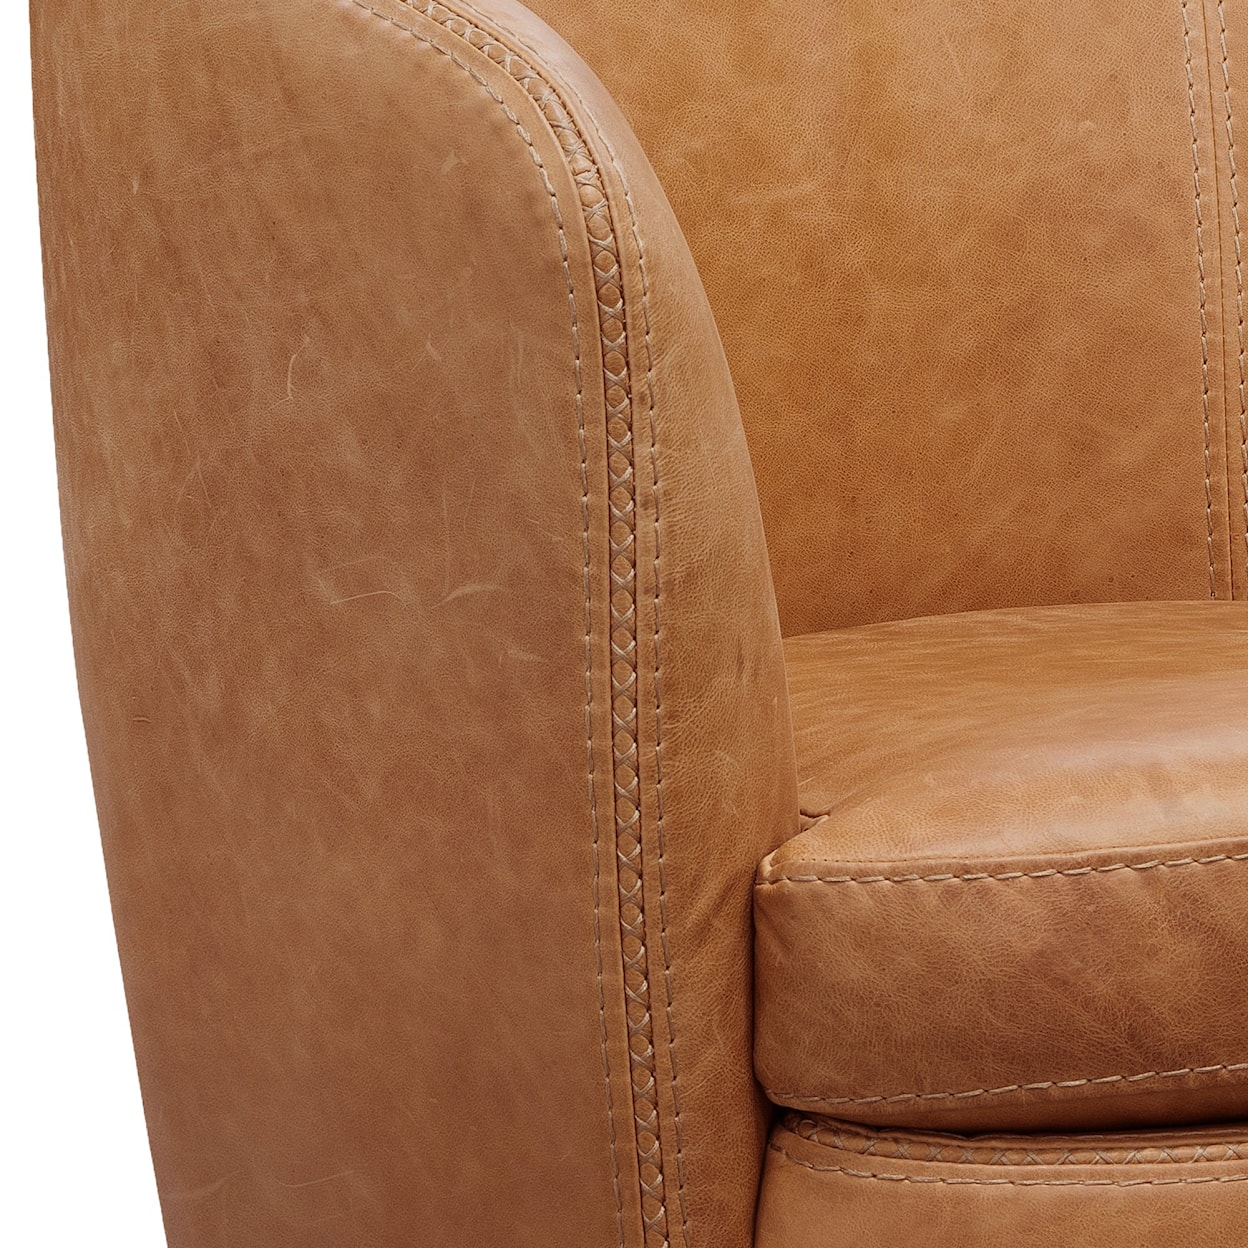 Parker House Barolo Upholstered Chairs